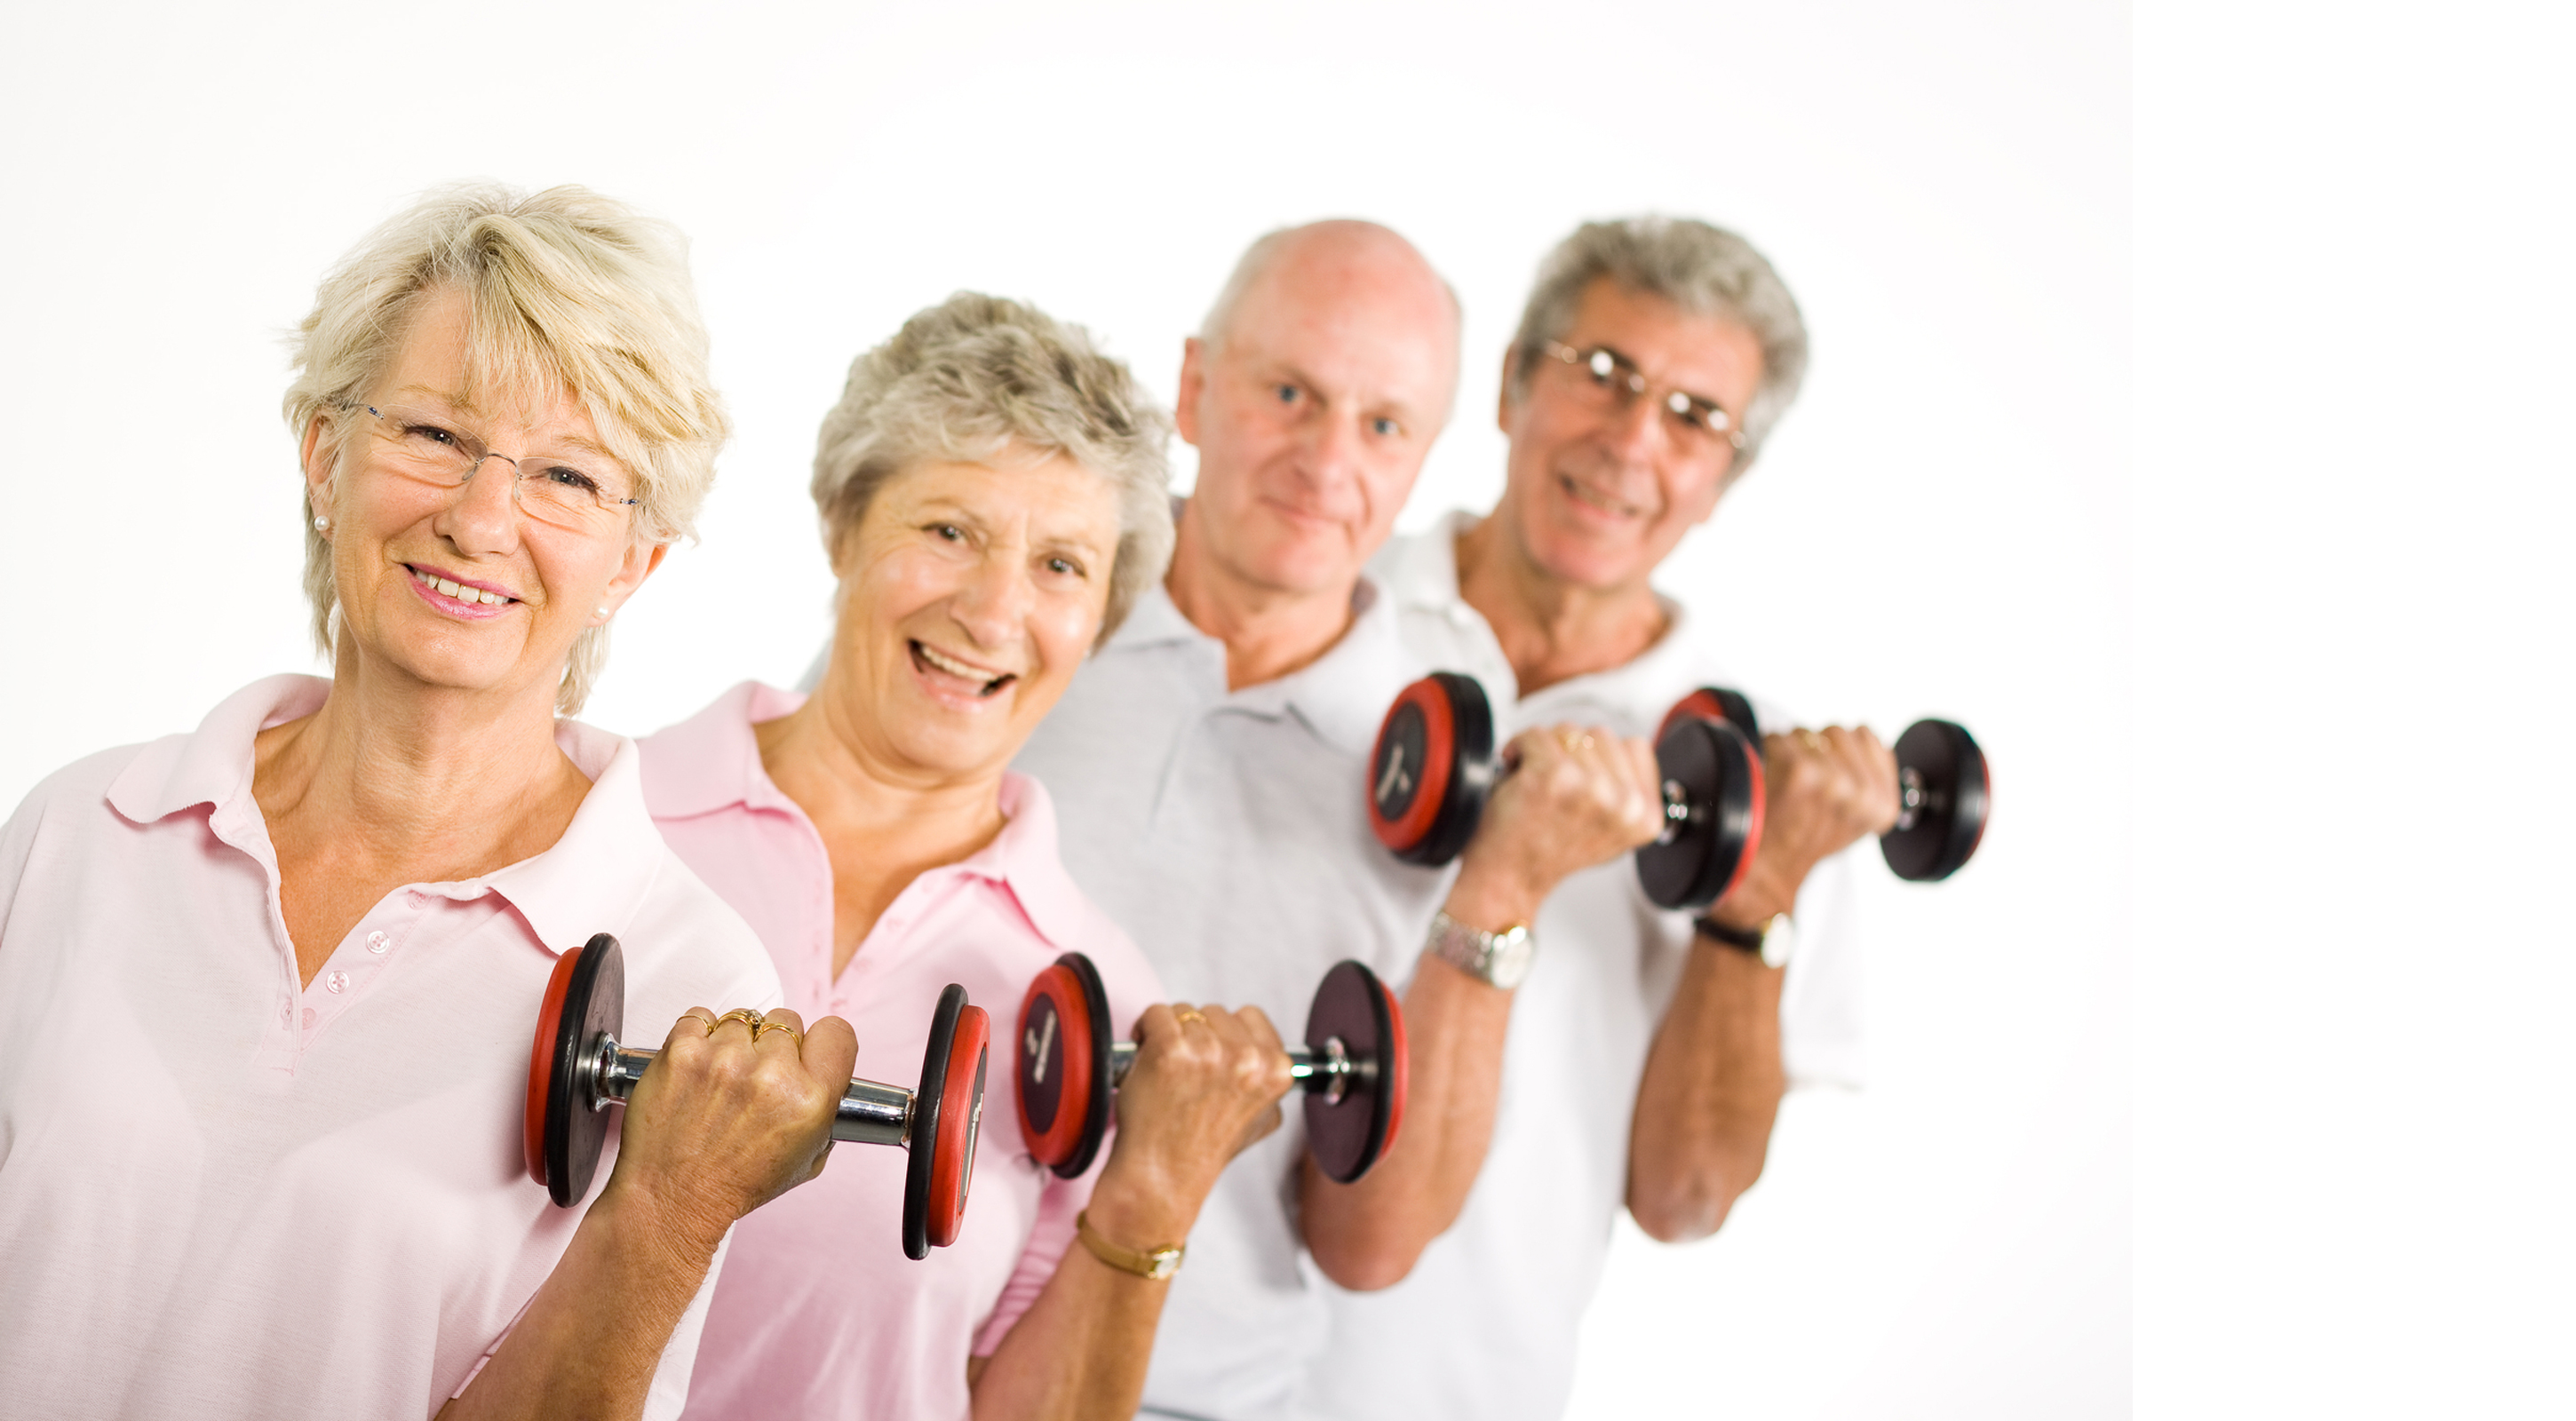 beneficial Fort Wayne exercise for osteoporosis